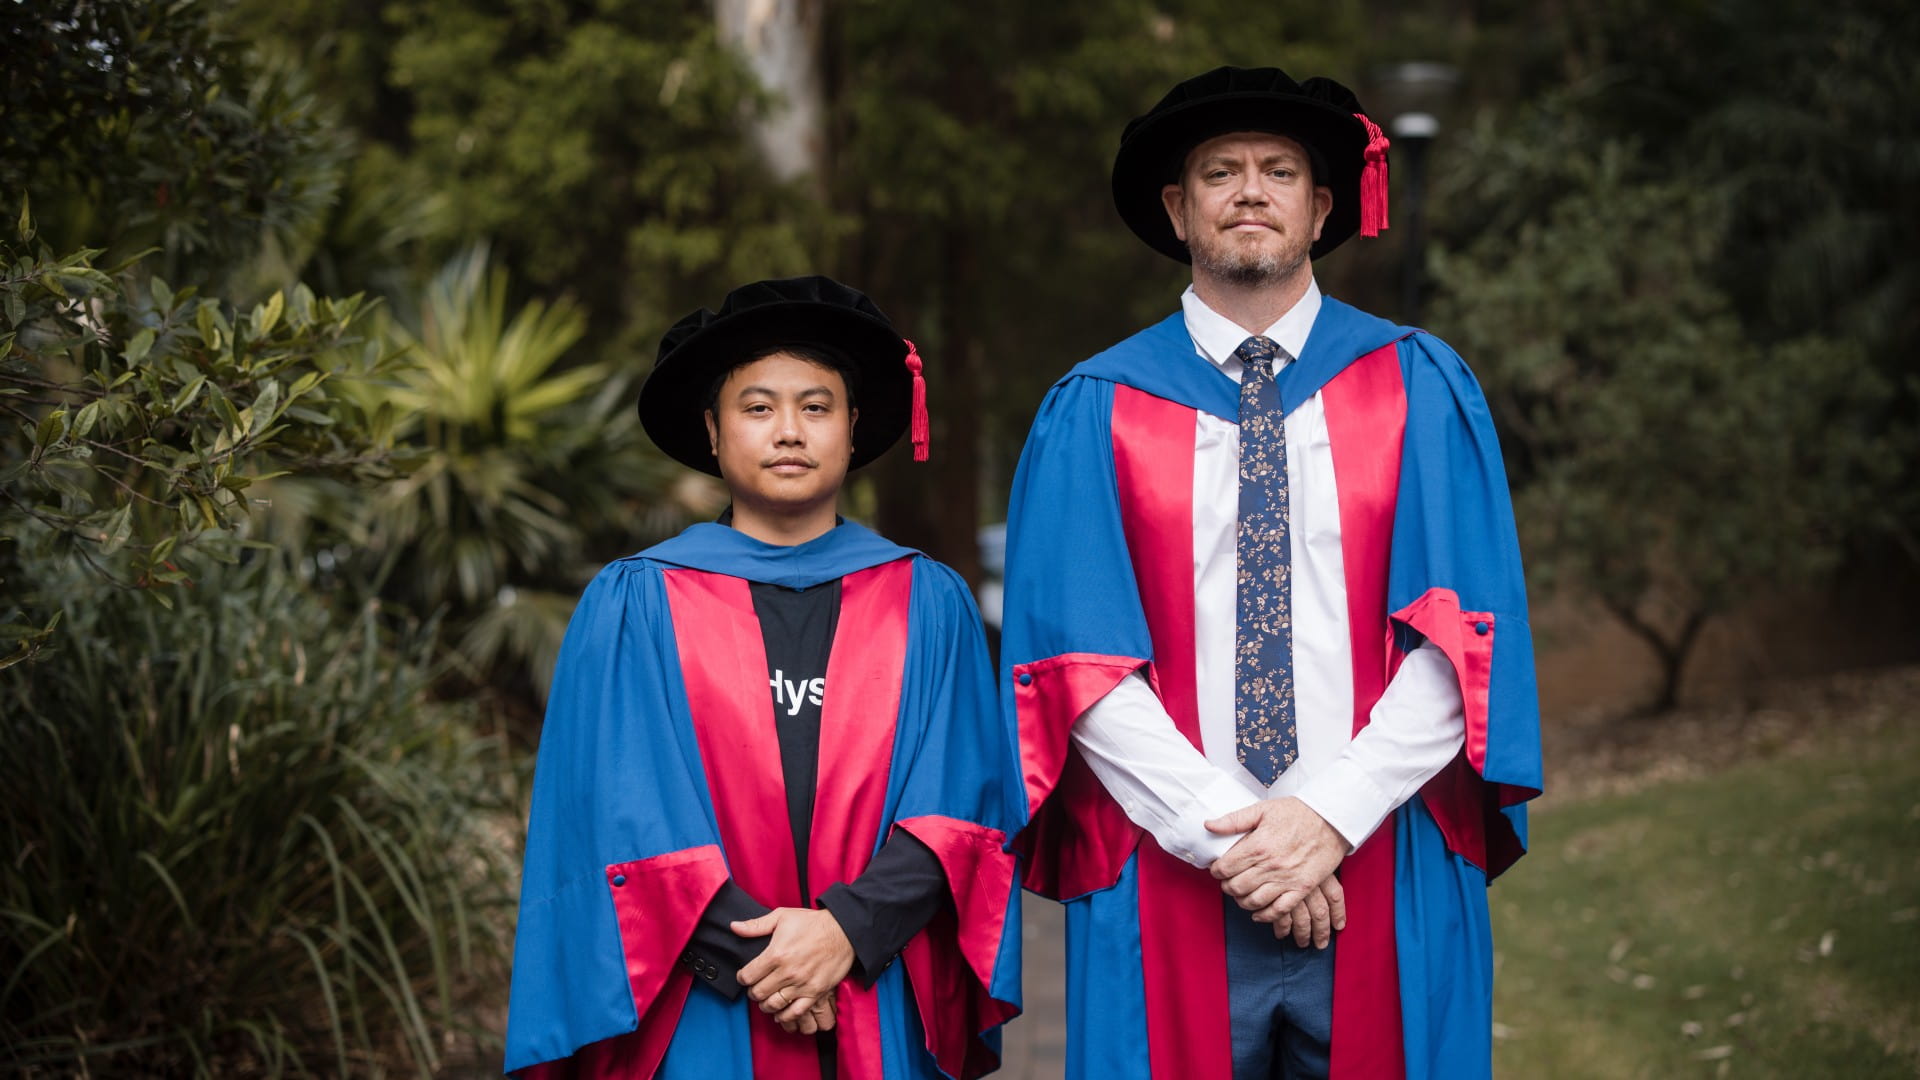 Dr Anh Linh Hoang and Dr Aaron Hodges stand with their hands crossed each in a red and blue graduation gown and cap. Photo: Michael Gray